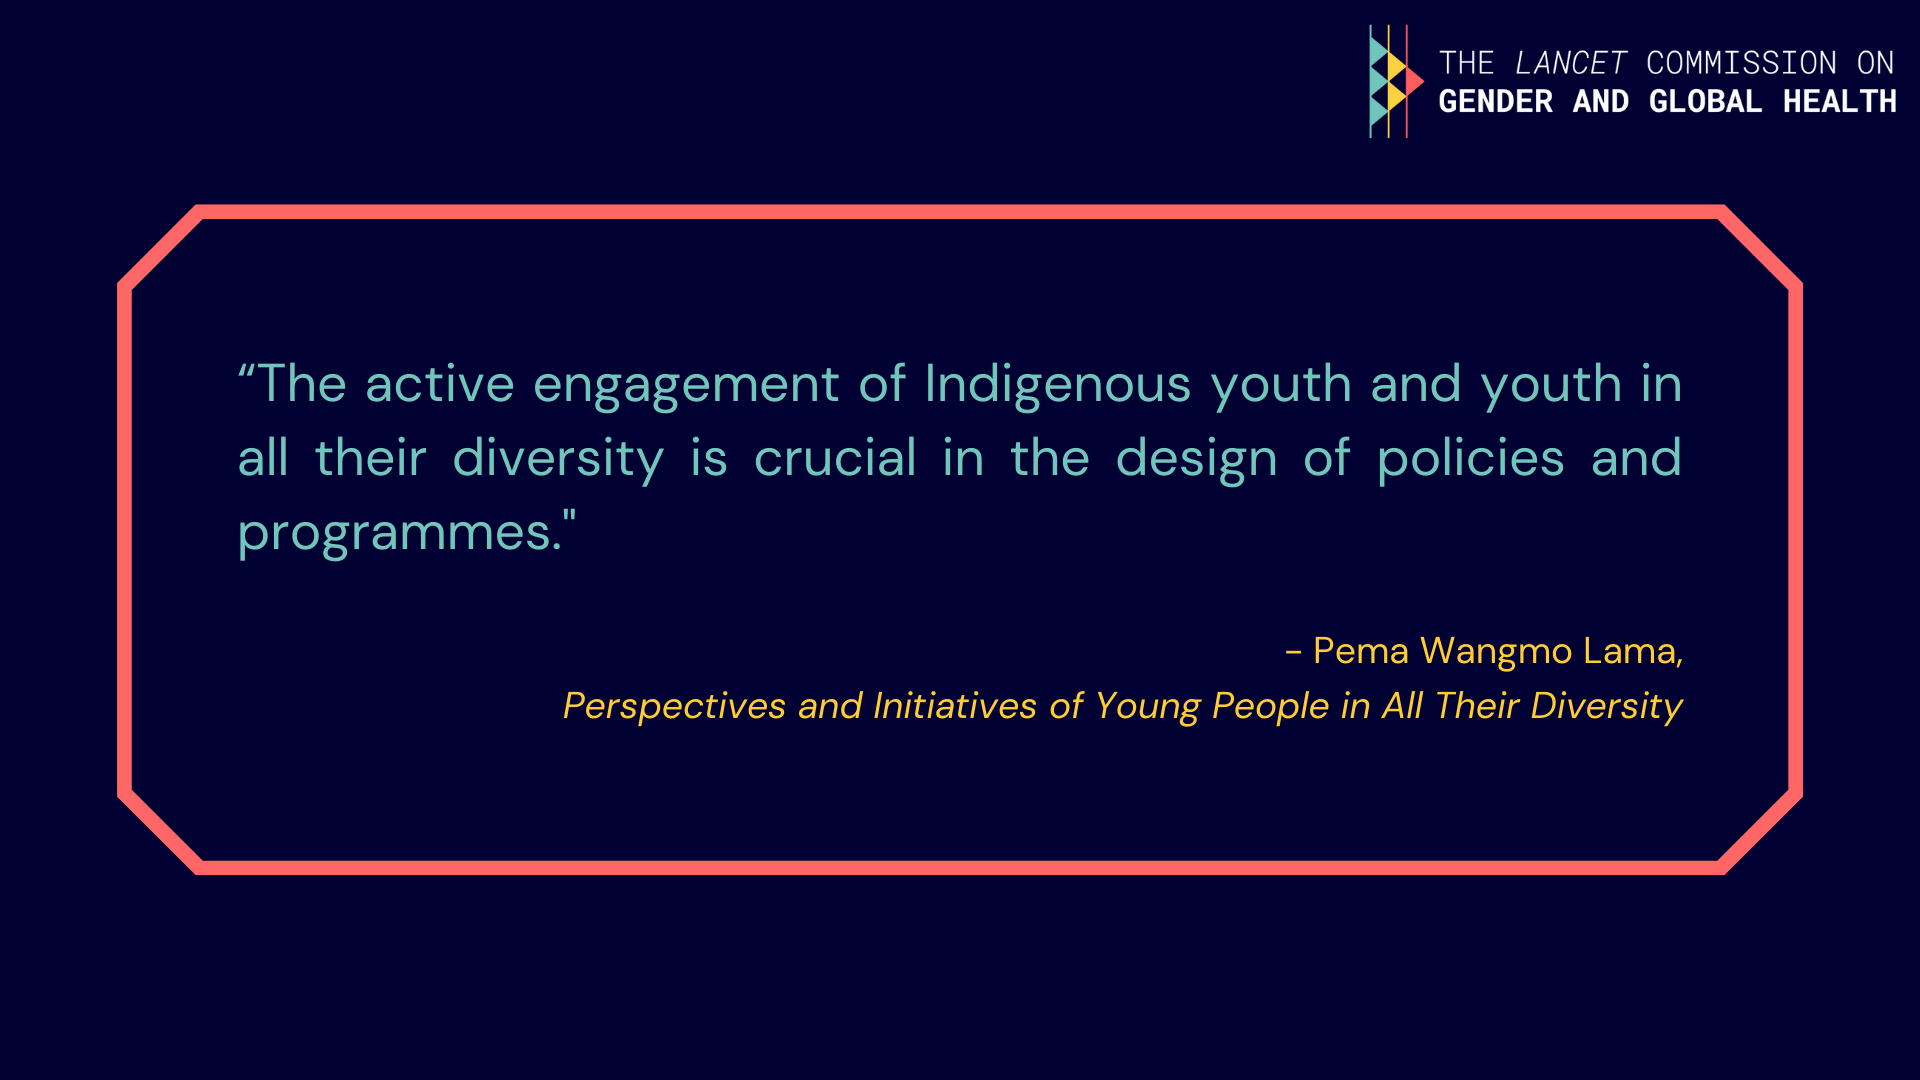 Quote from Pema Wangmo Lama: "The active engagement of Indigenous youth and youth in all their diversity is crucial in the design of policies and programmes".